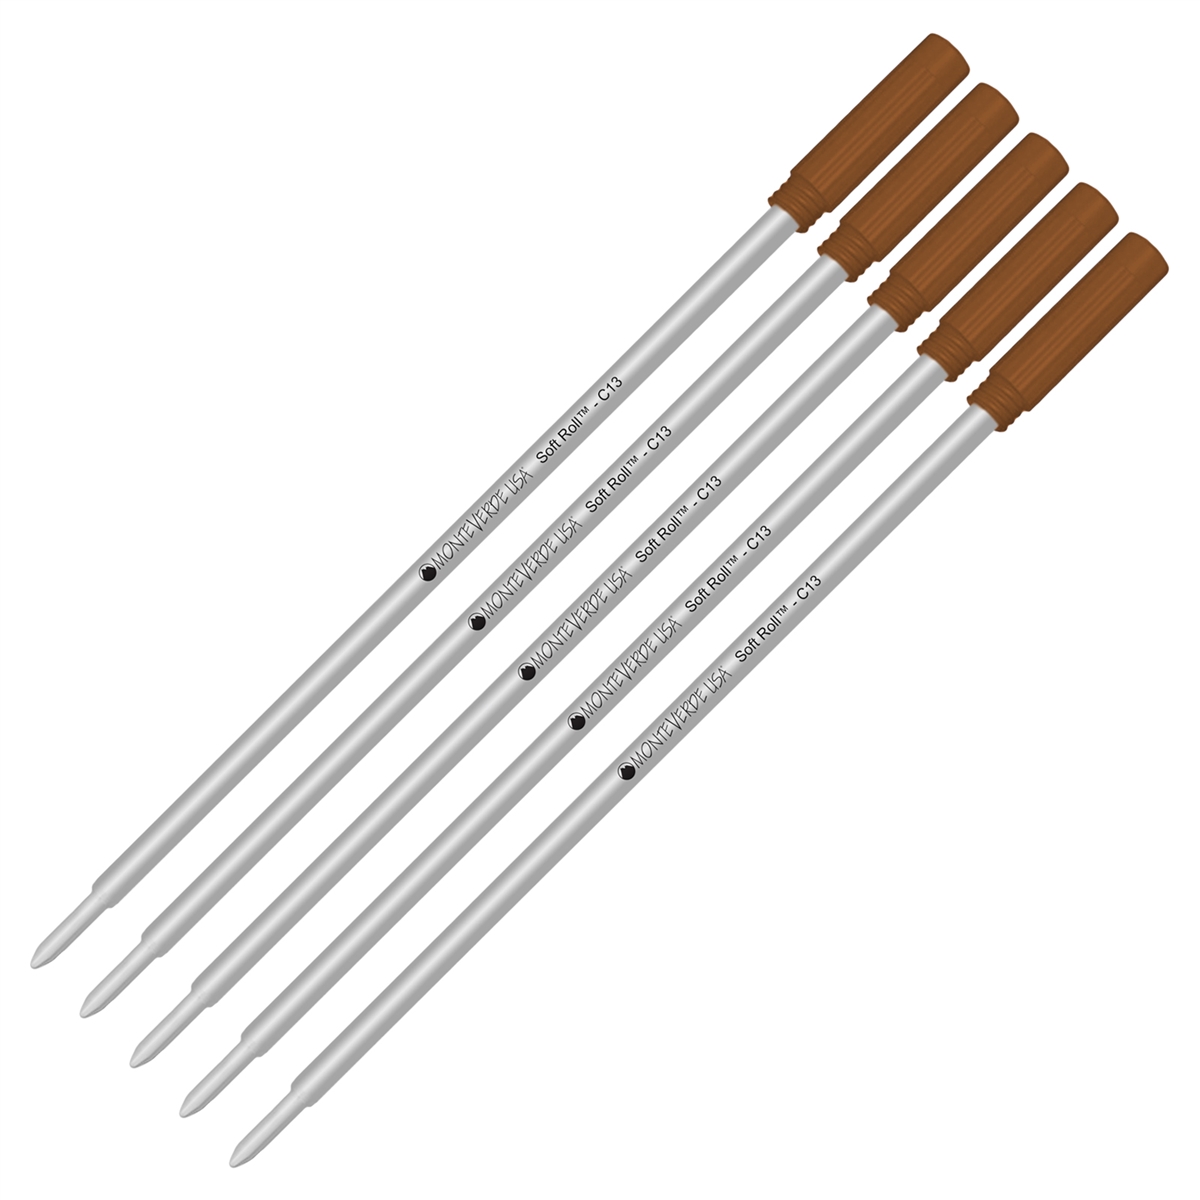 5 Pack - Monteverde Soft Roll Ballpoint C13 Paste Ink Refill Compatible with most Cross Style Ballpoint Pens - Brown (Medium Tip 0.7mm) - Lanier Pens